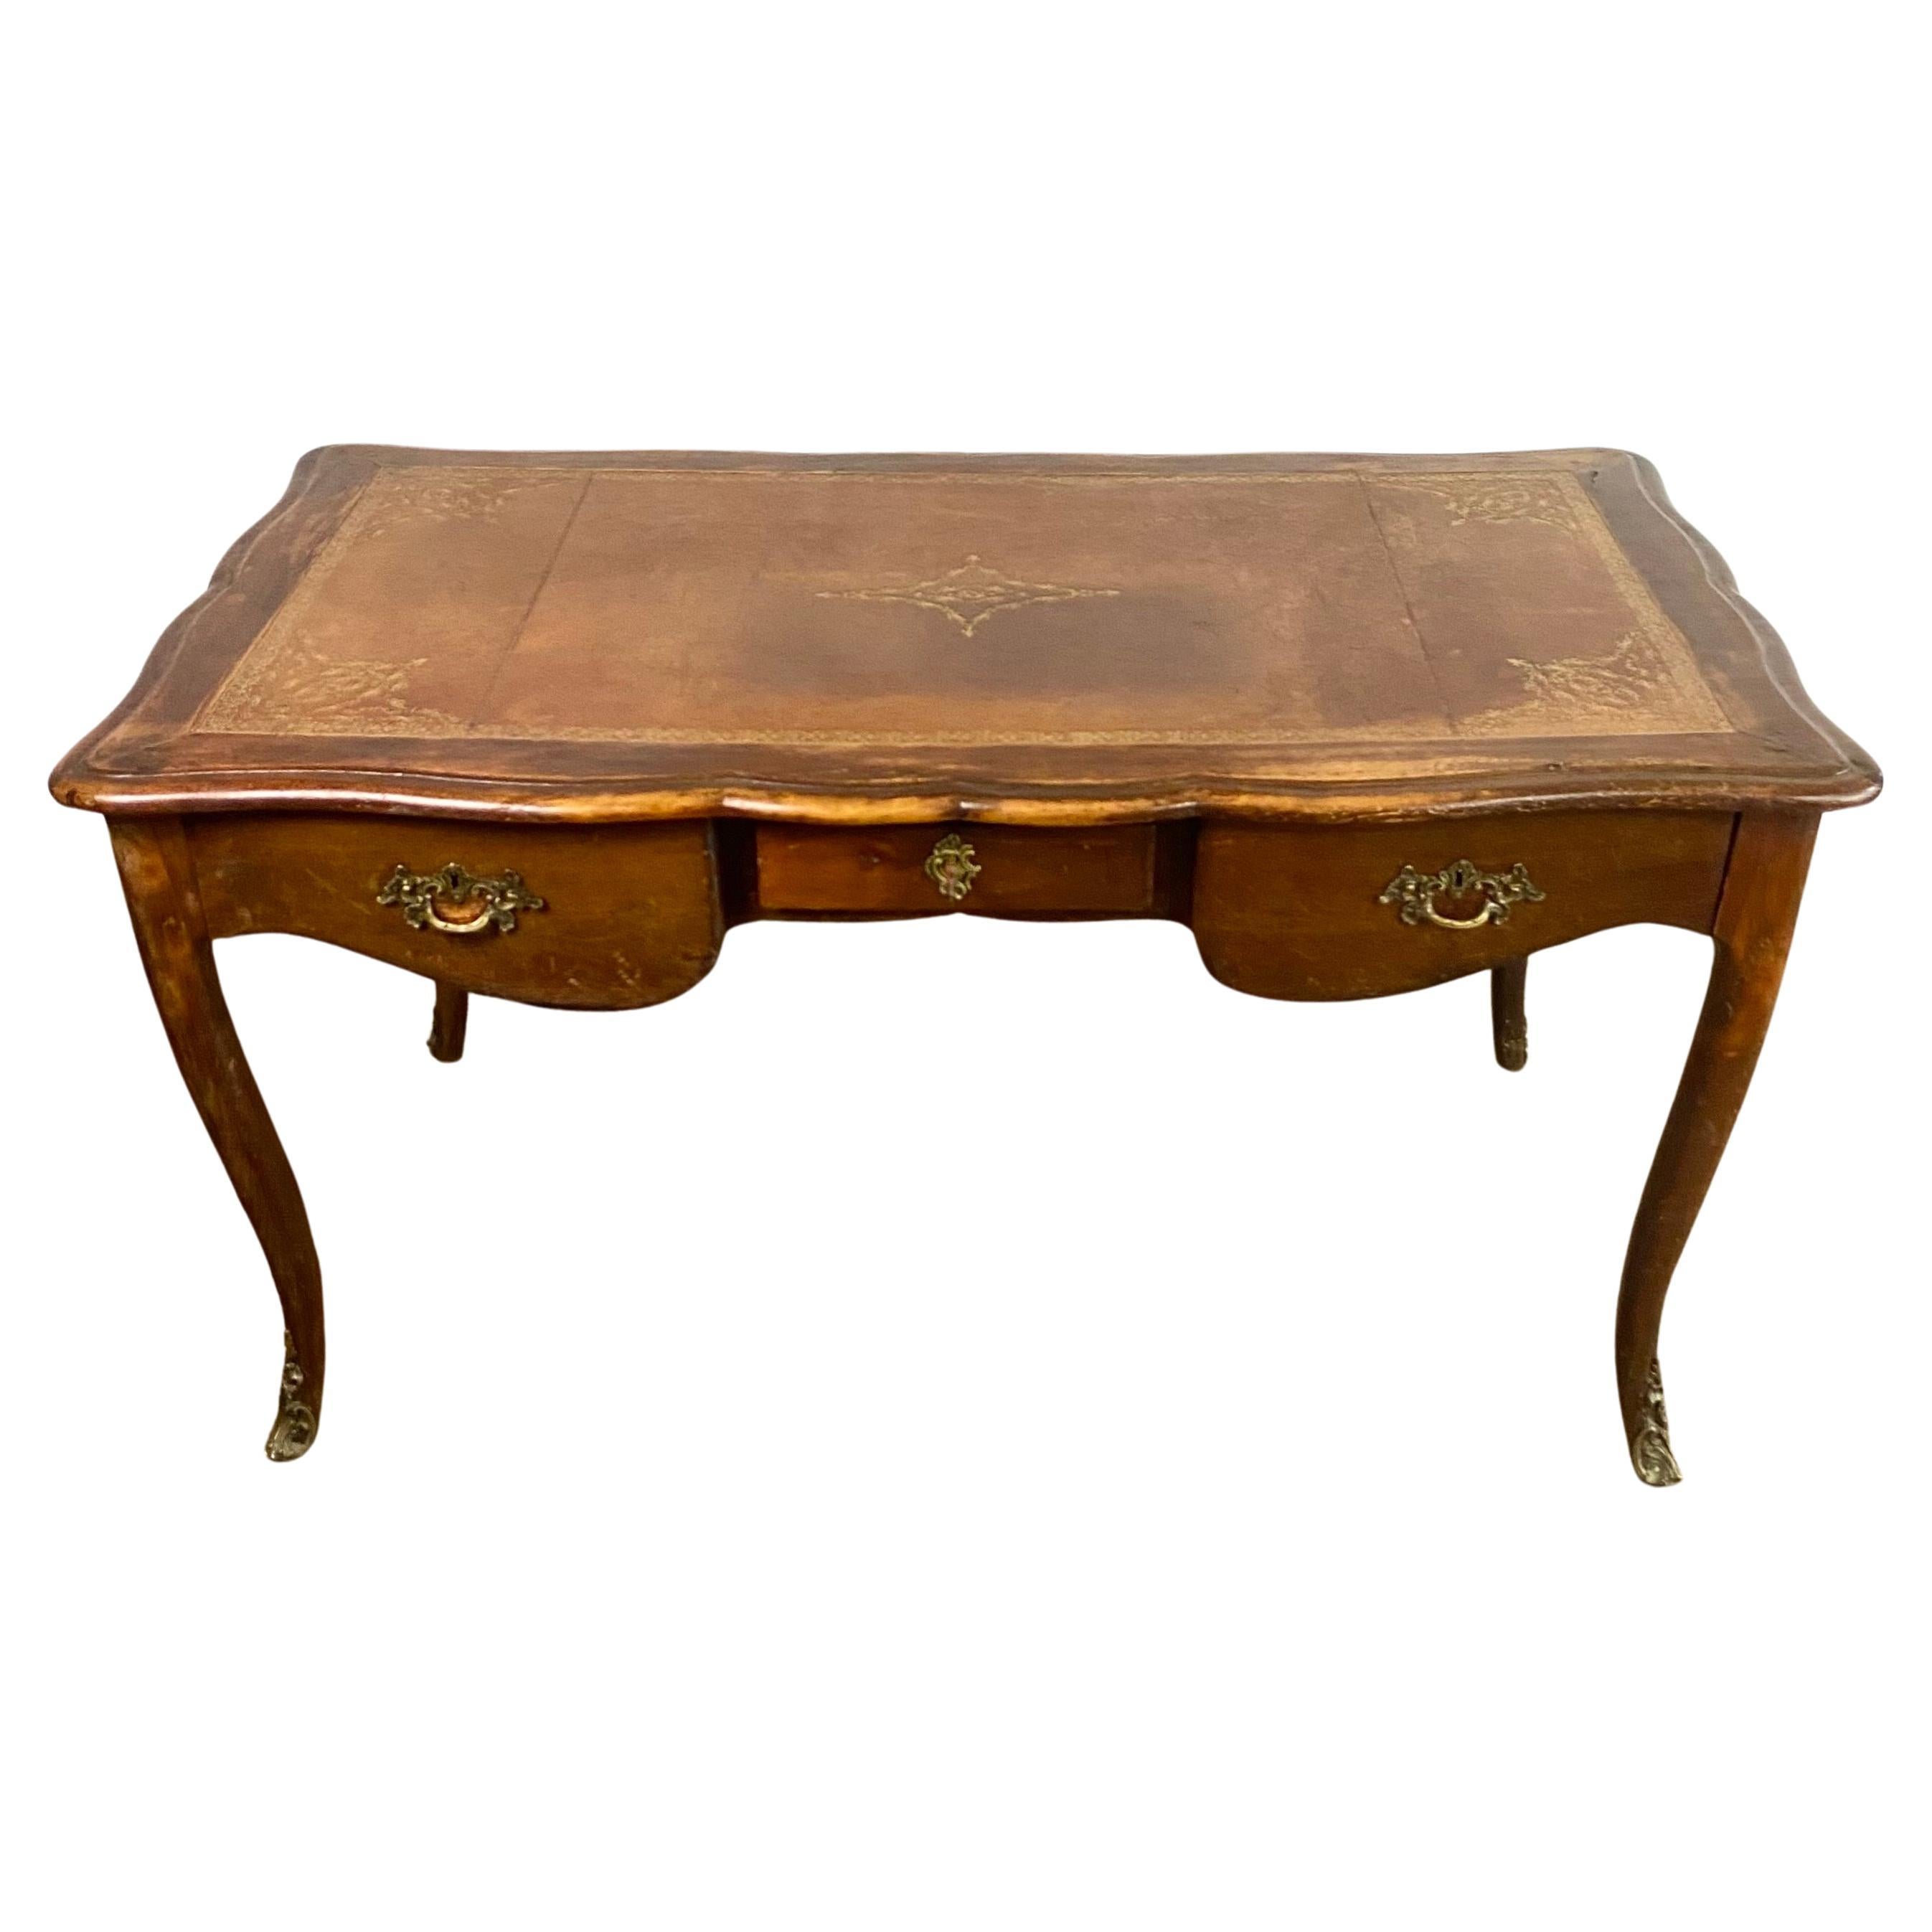 French Louis XV Period Flat Desk with 3 Drawers & Bronze Fittings - France 18th